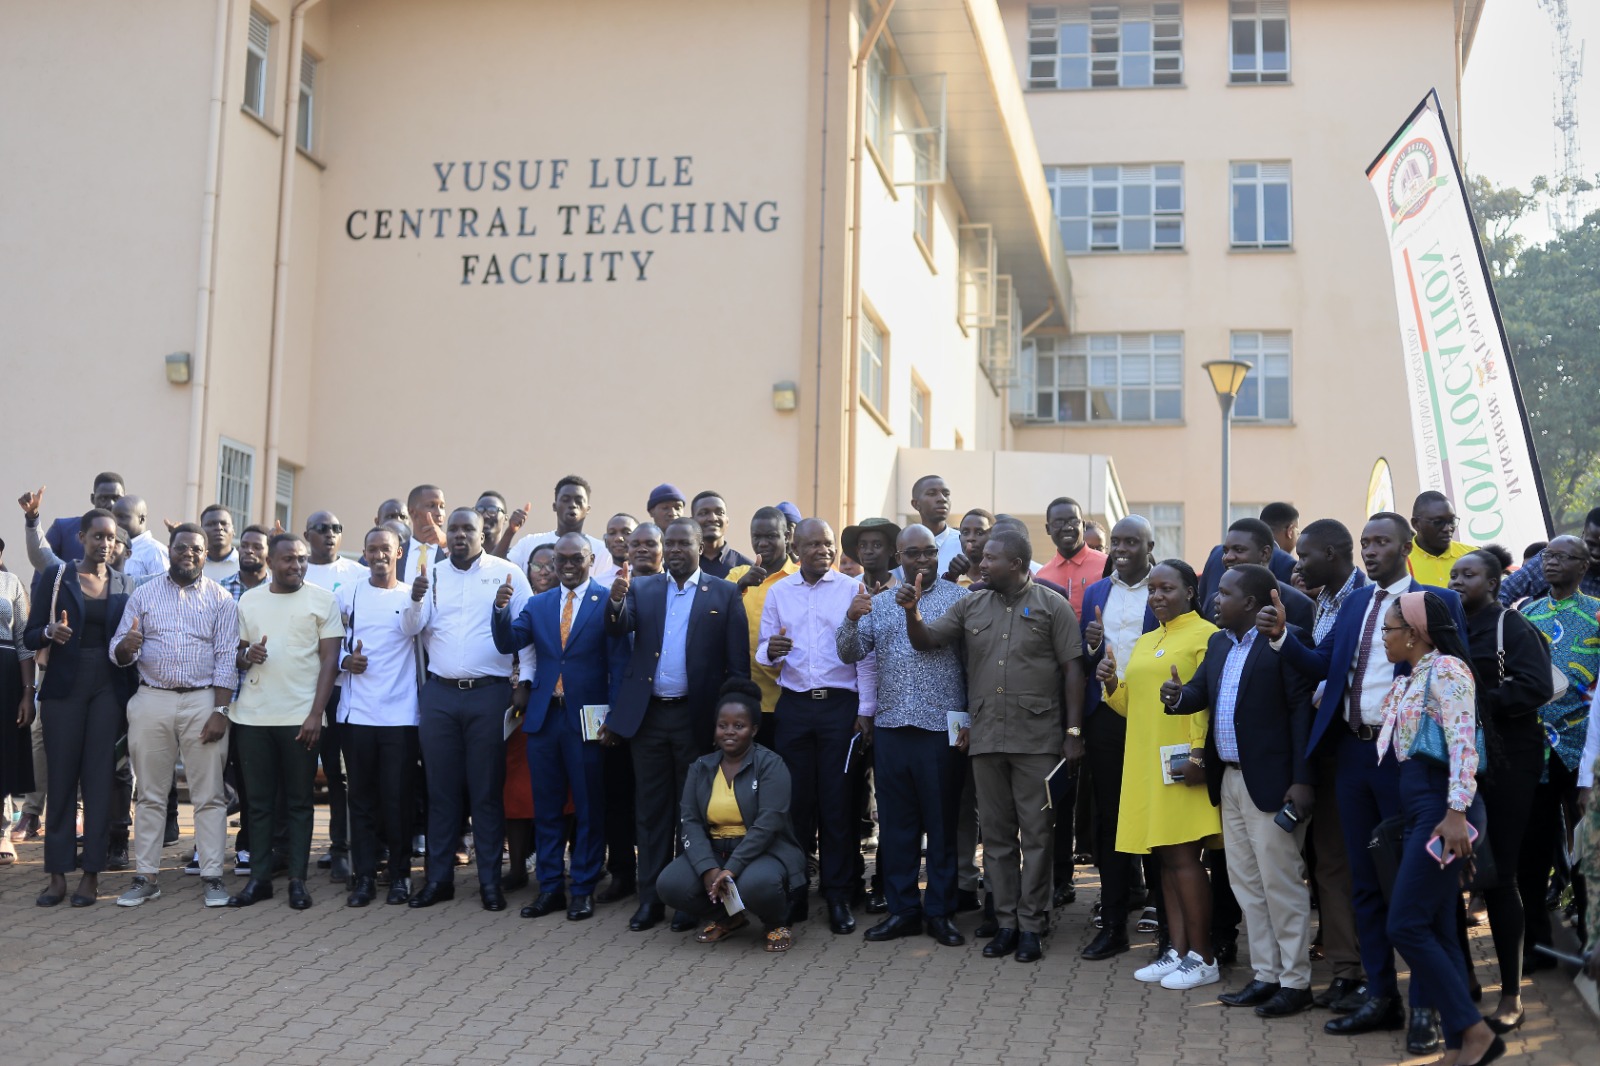 NRM Secretary General Calls for Integrity and Patience Among University Leaders